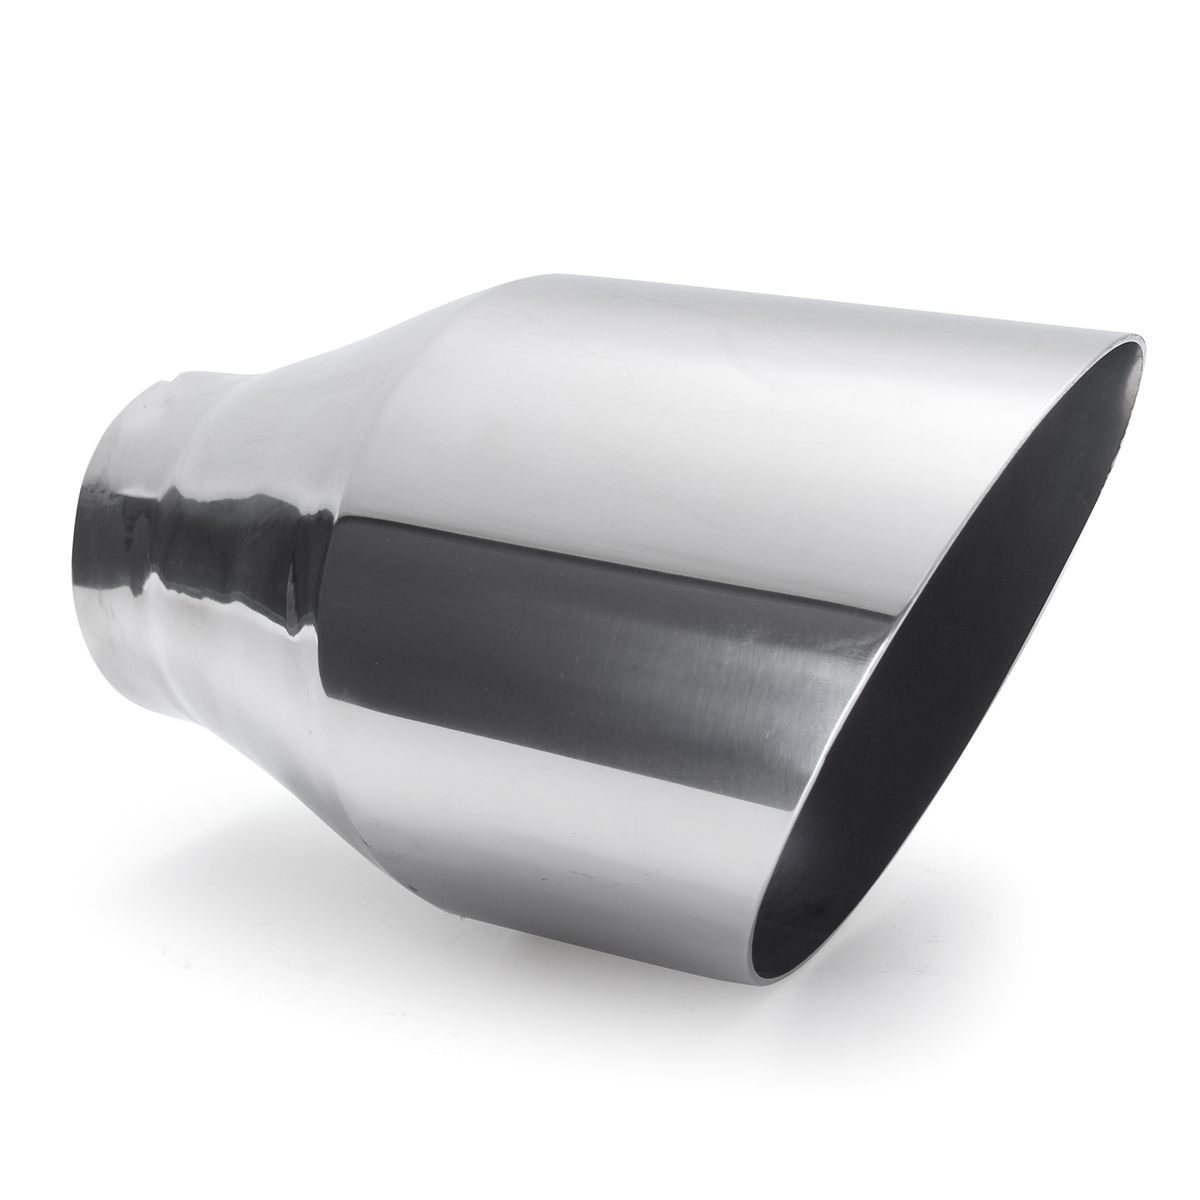 Universal-Stainless-Steel-Exhaust-Muffler-Round-Slant-225-Inch-Inelt-4-Inch-Outlet-1353799